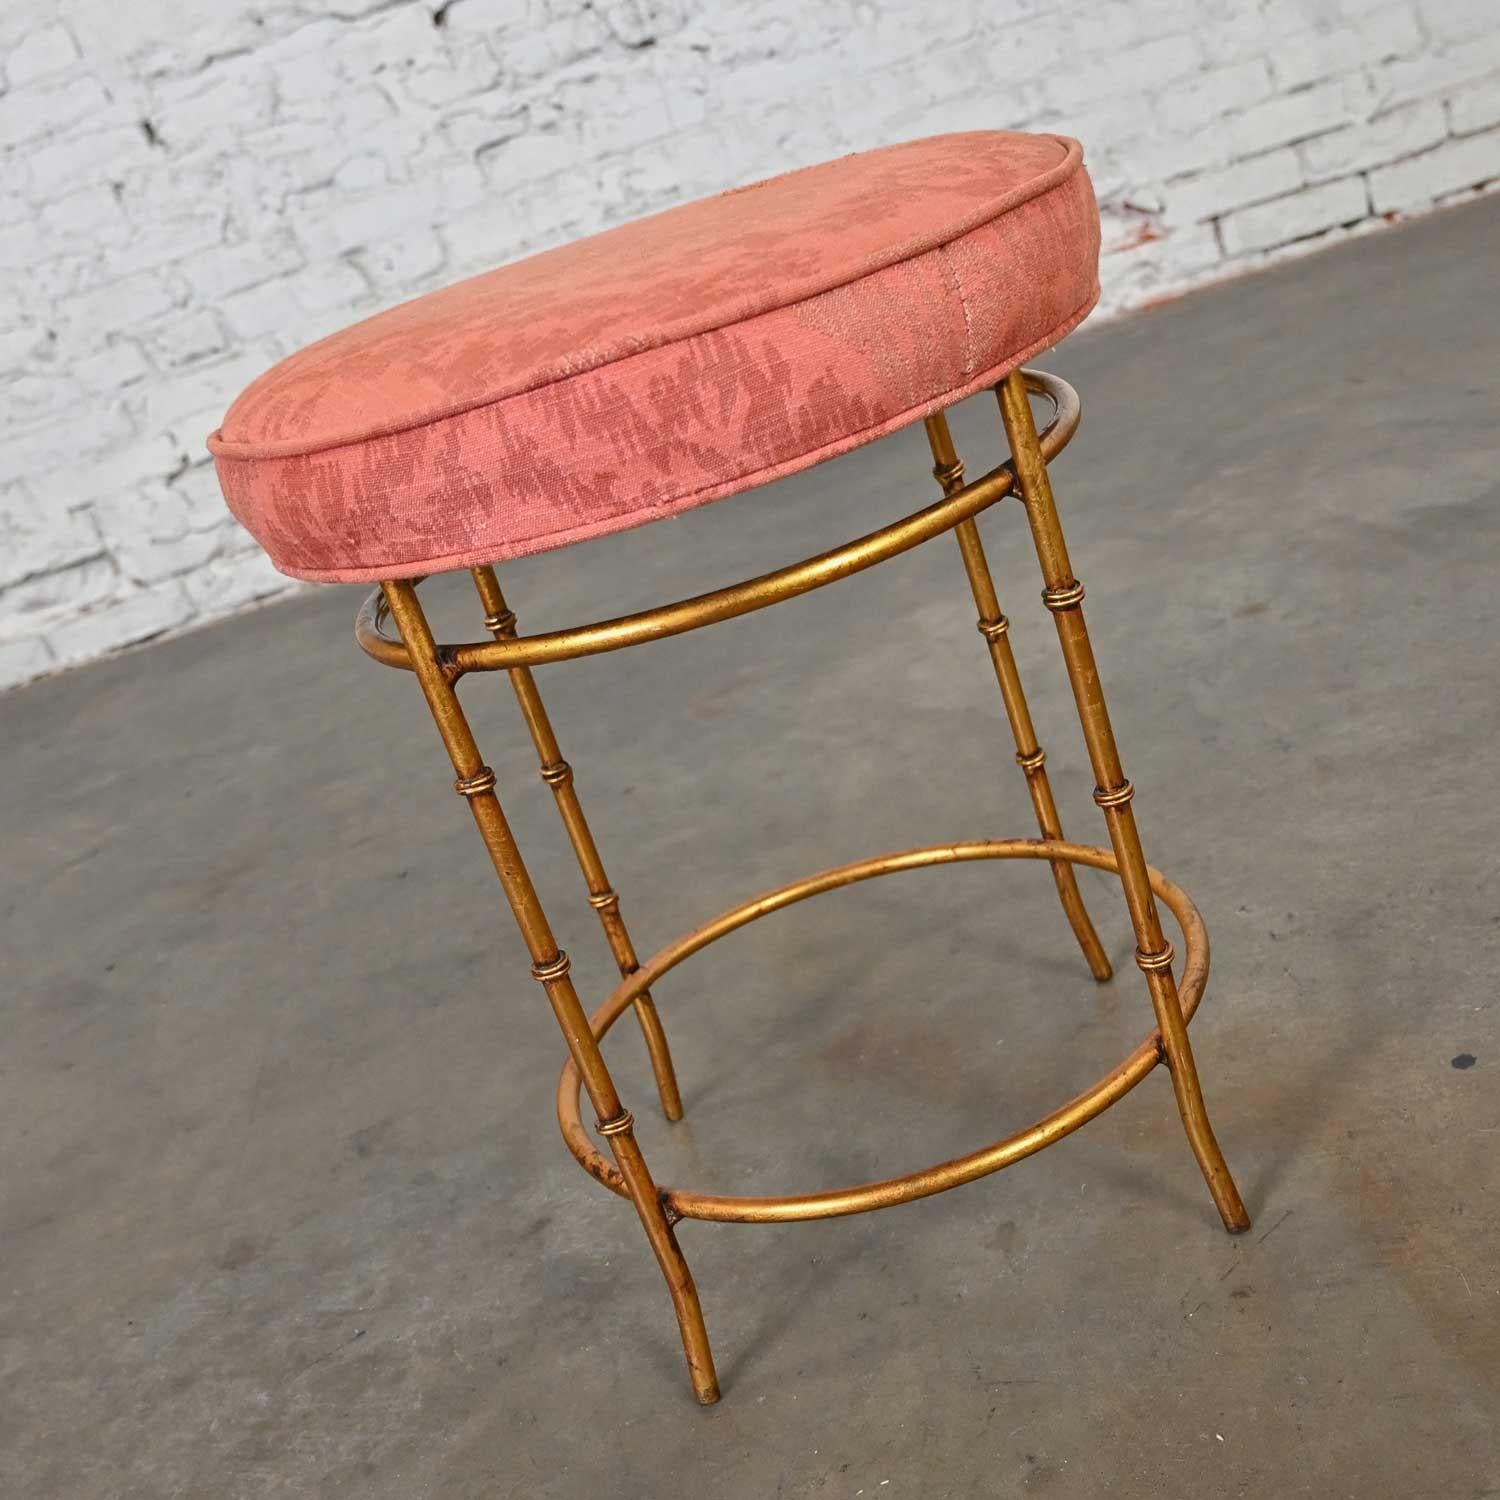 Gorgeous vintage Mid-20th Century Italian style round stool with rose damask seat & gilt metal faux bamboo legs. Beautiful condition, keeping in mind that this is vintage and not new so will have signs of use and wear. The damask fabric is worn &